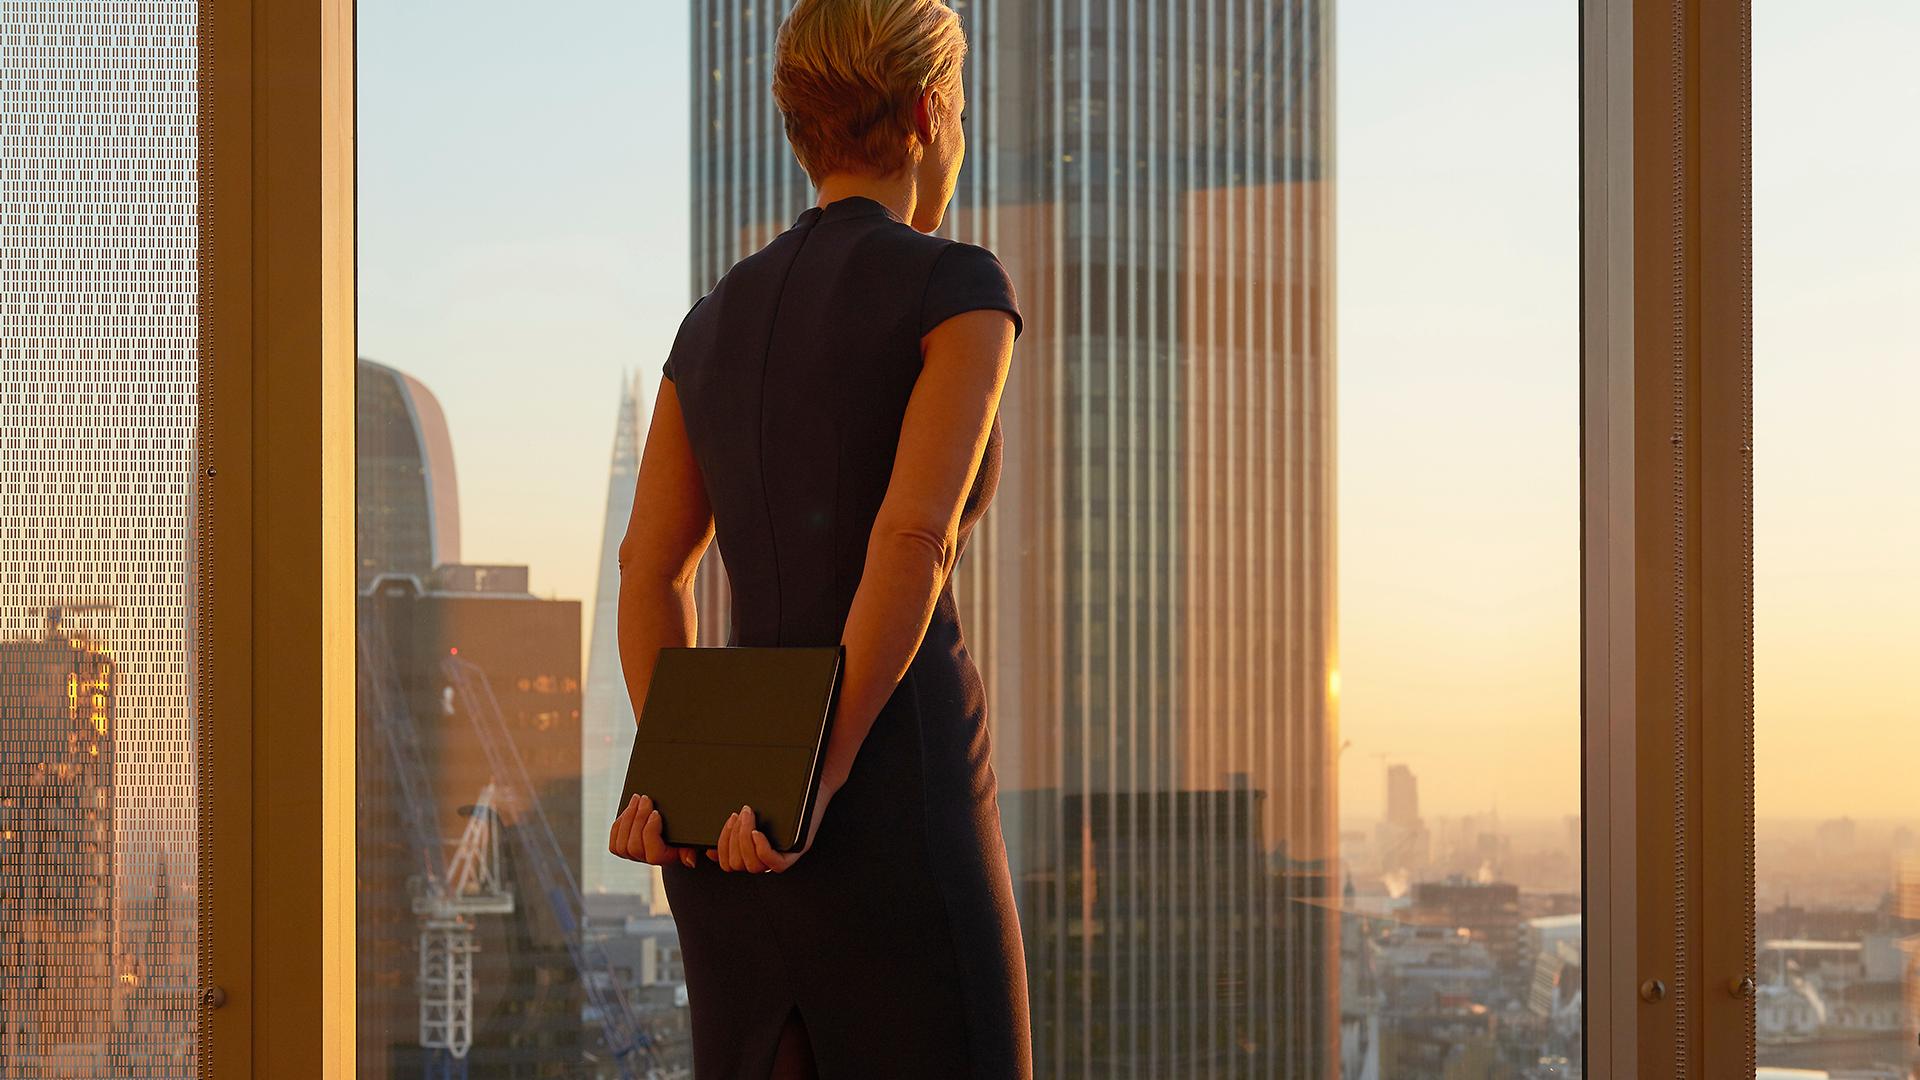 Businesswoman looking to the future - stock photo